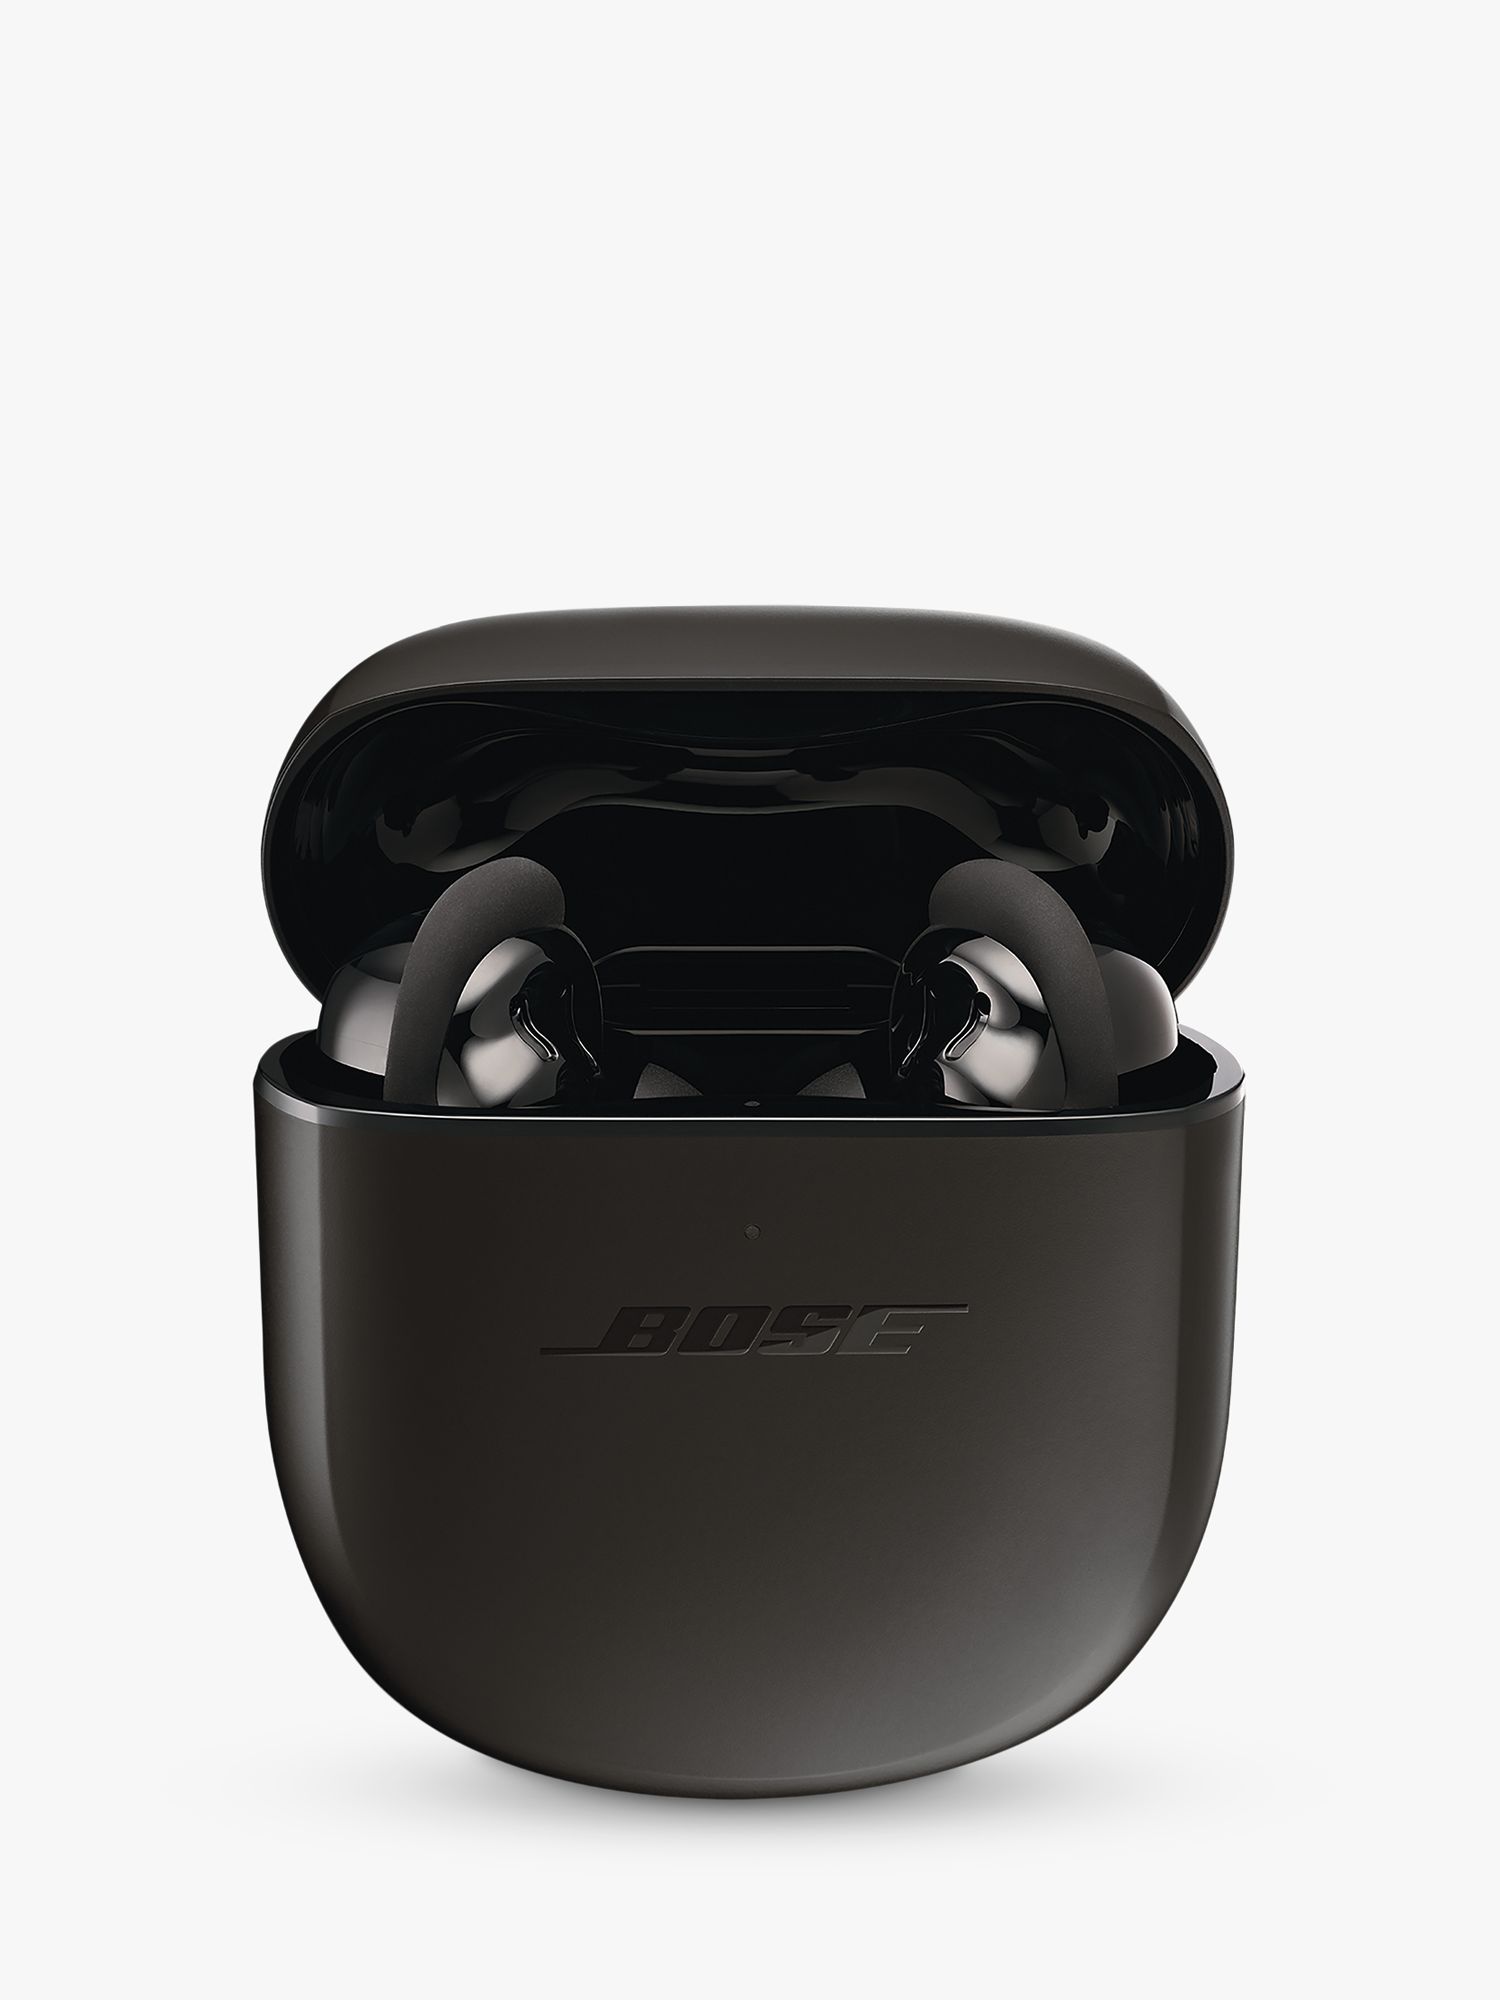 Bose launches its latest set of wireless noise-canceling headphones